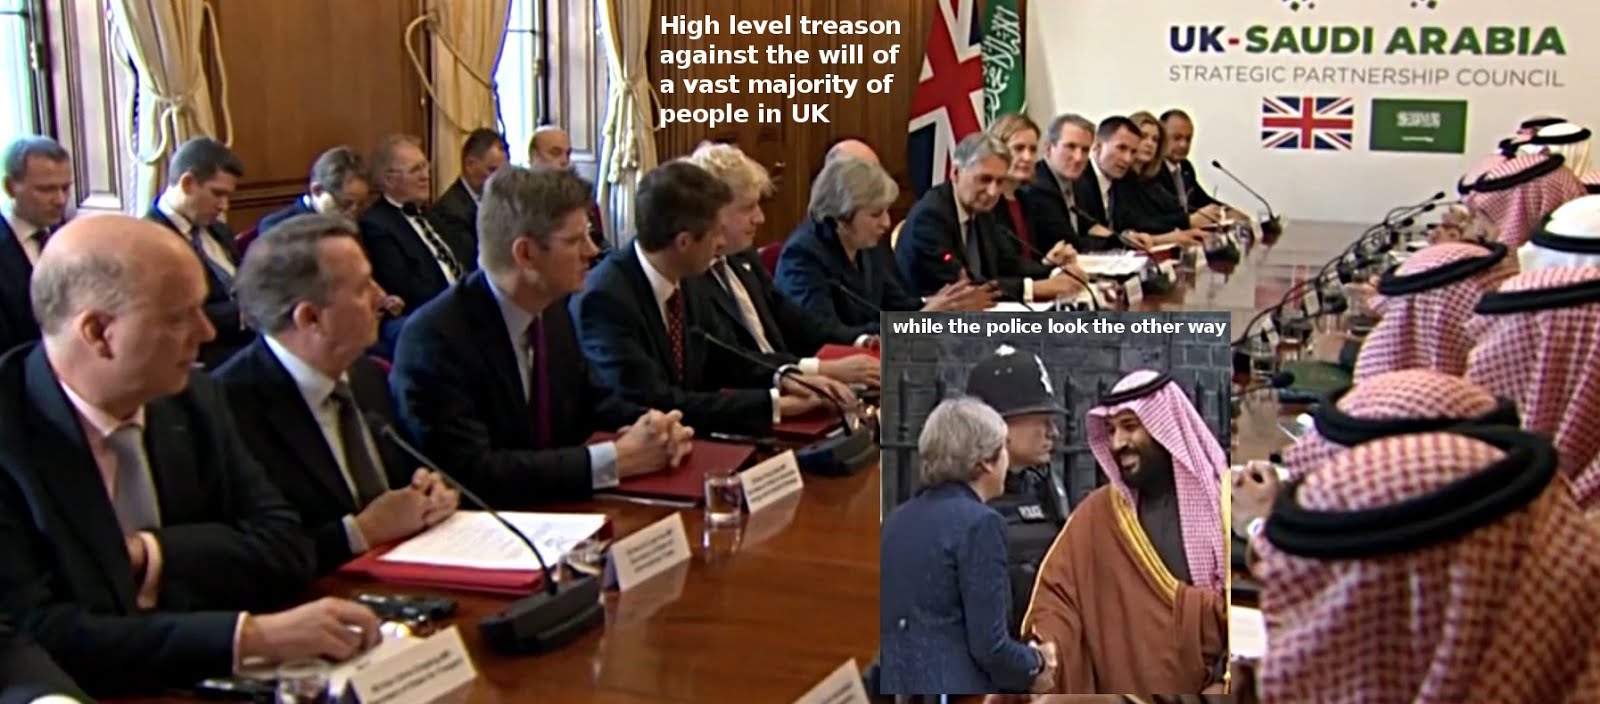 Welcoming UK's main security threat - and committing treason against the will of the people